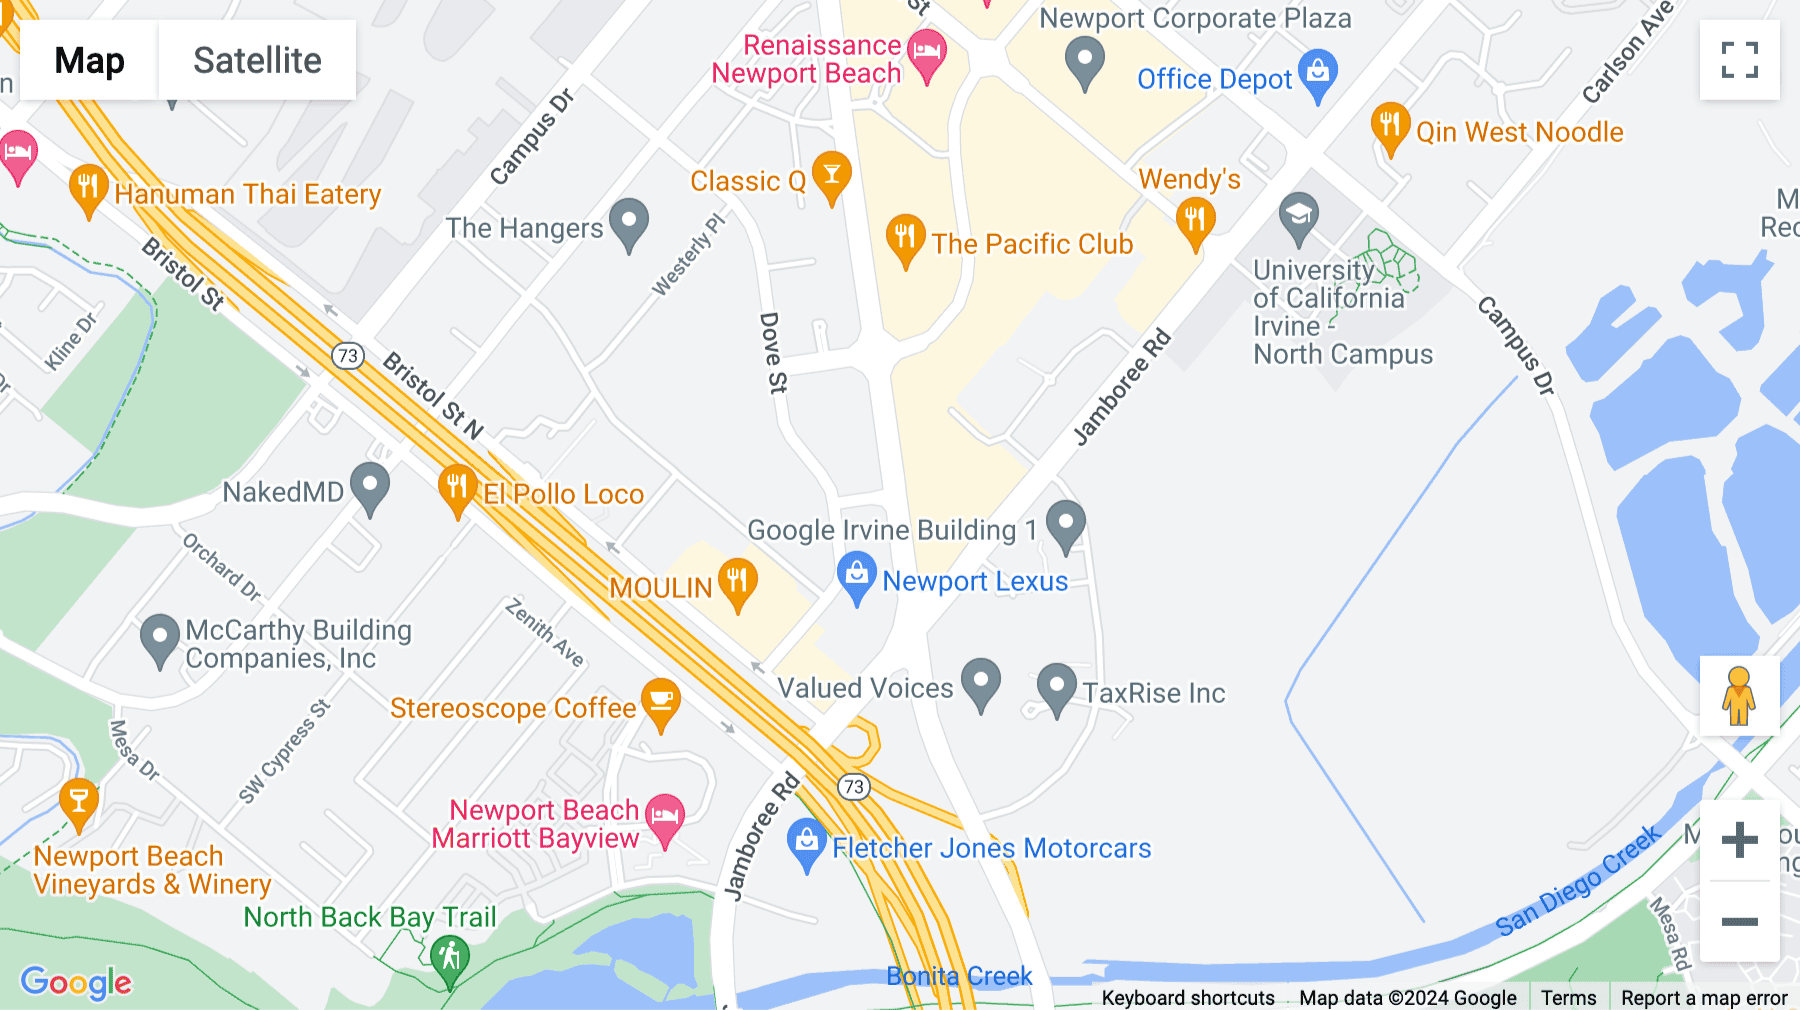 Click for interative map of 4000 MacArthur Blvd, Suite 900, Newport Beach